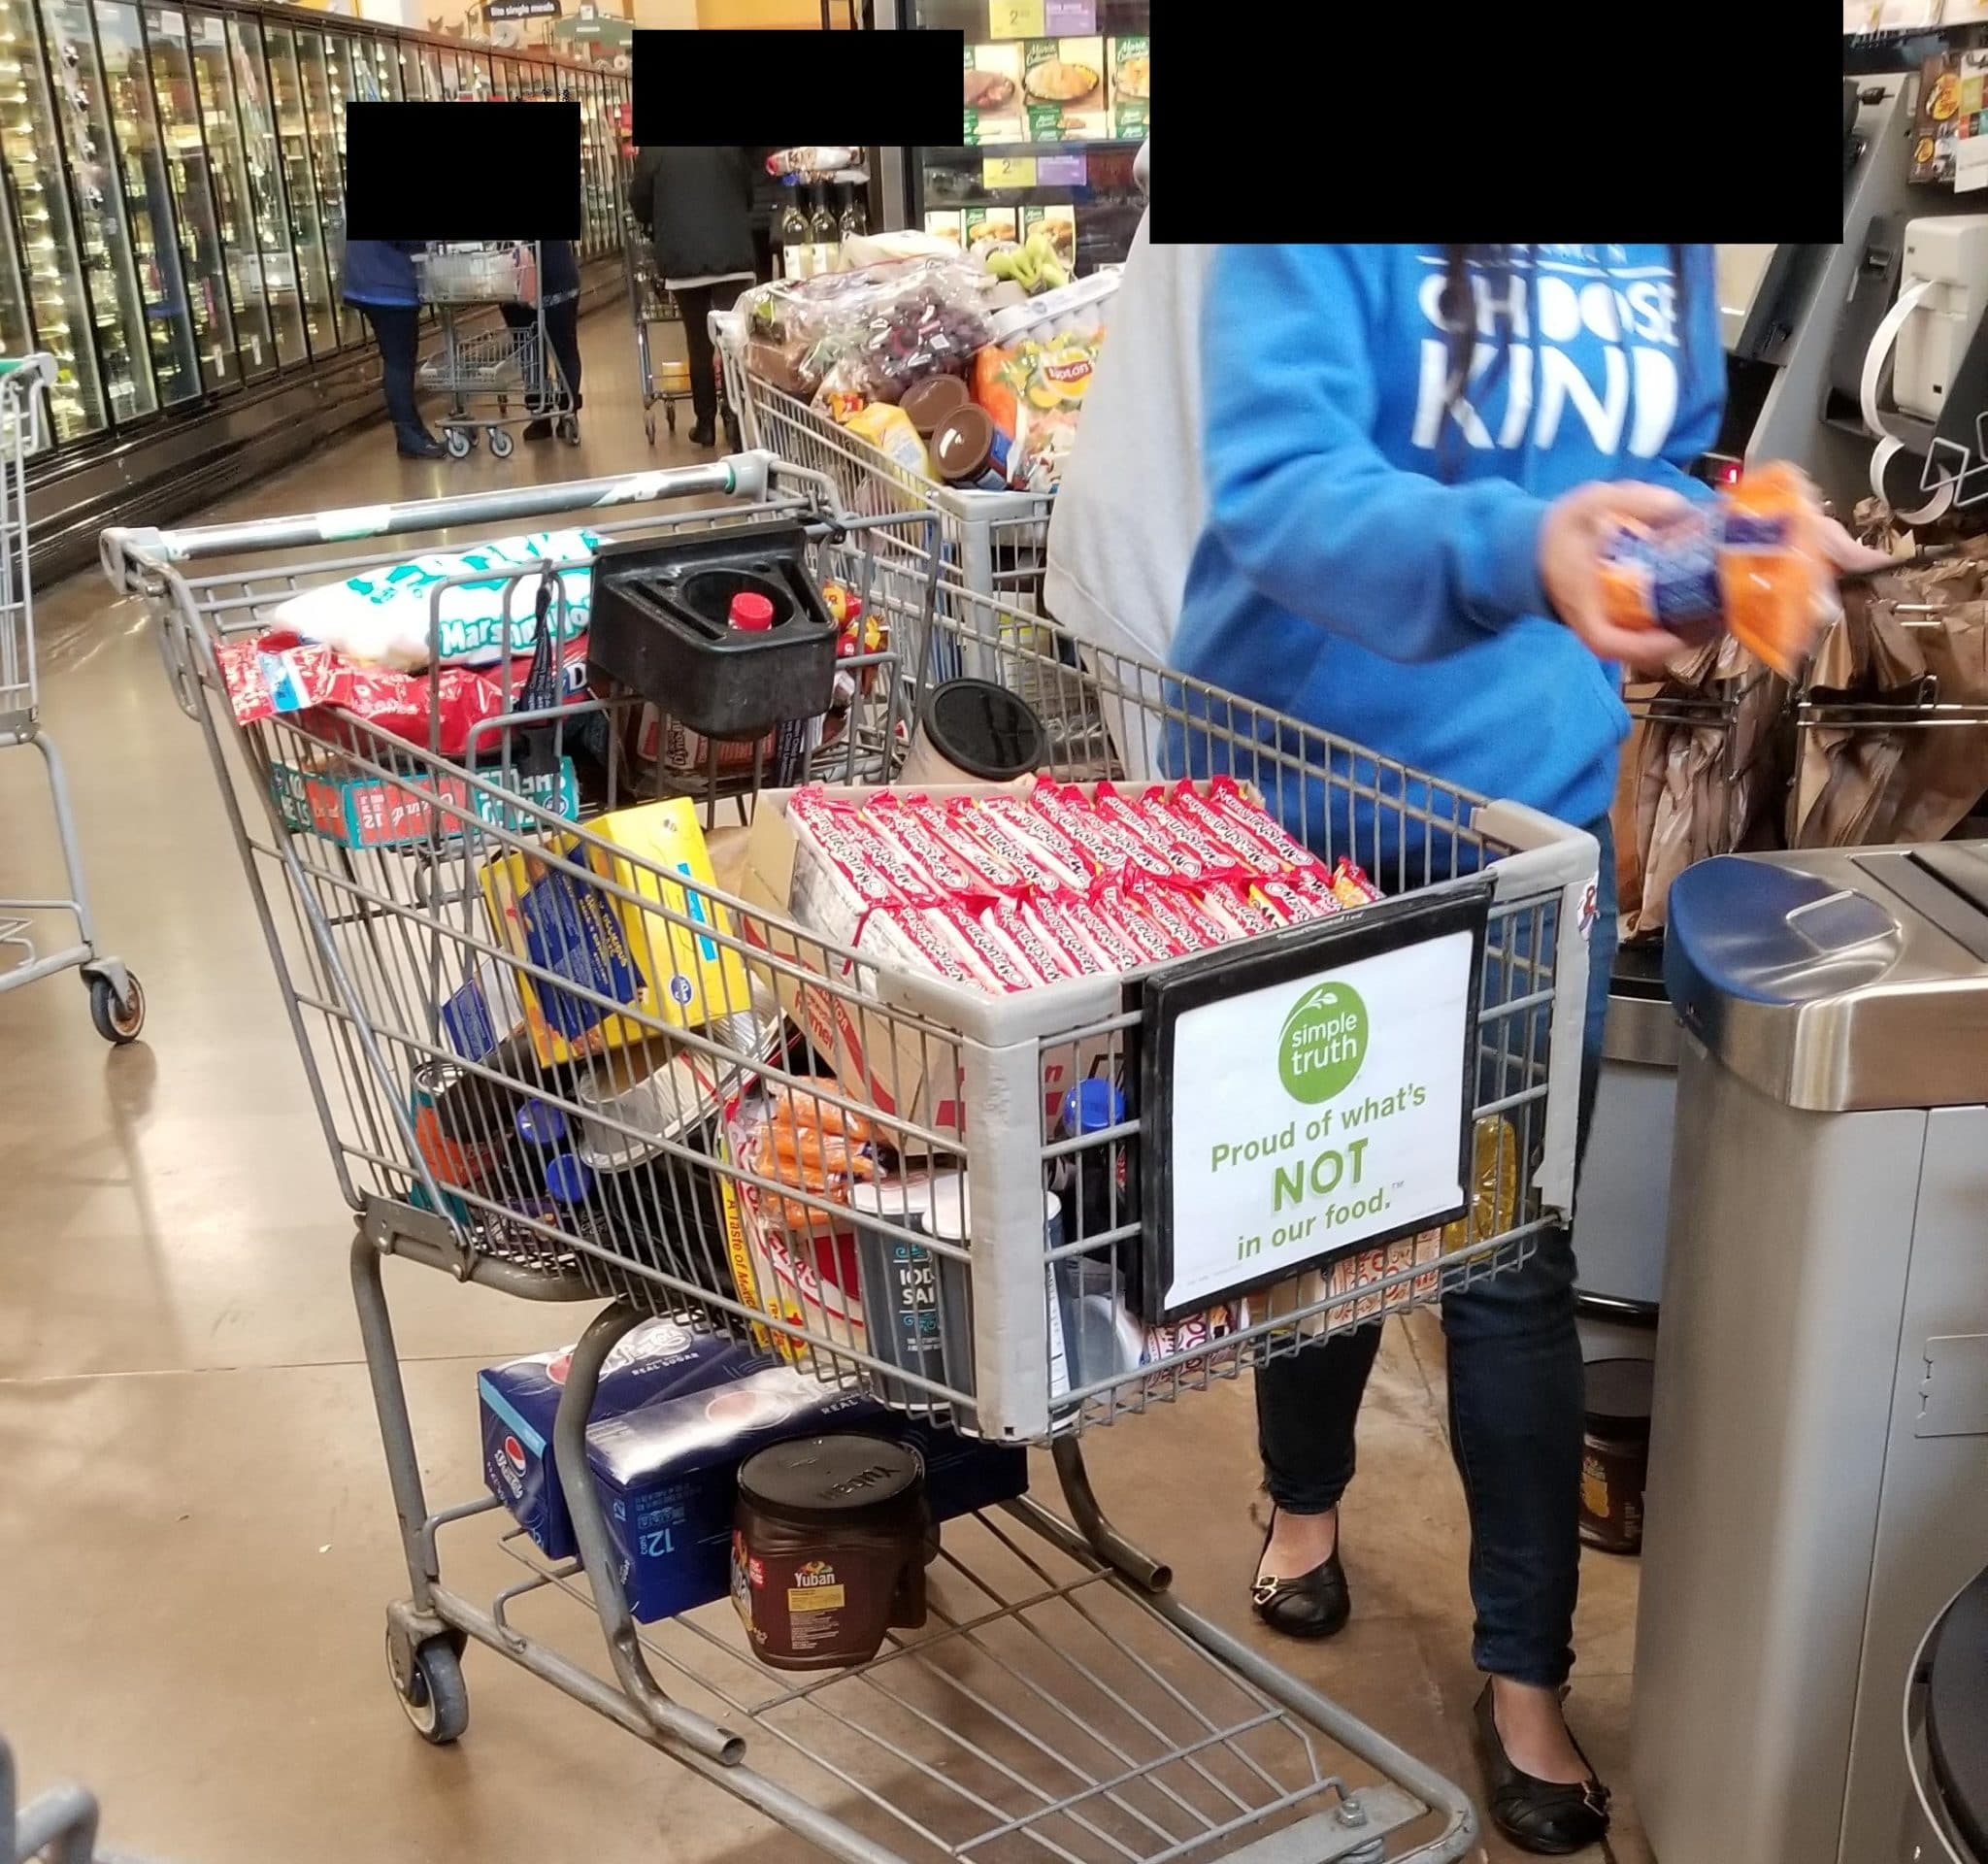 Let's Not Bring Full Shopping Carts to the Self-Checkout Aisle